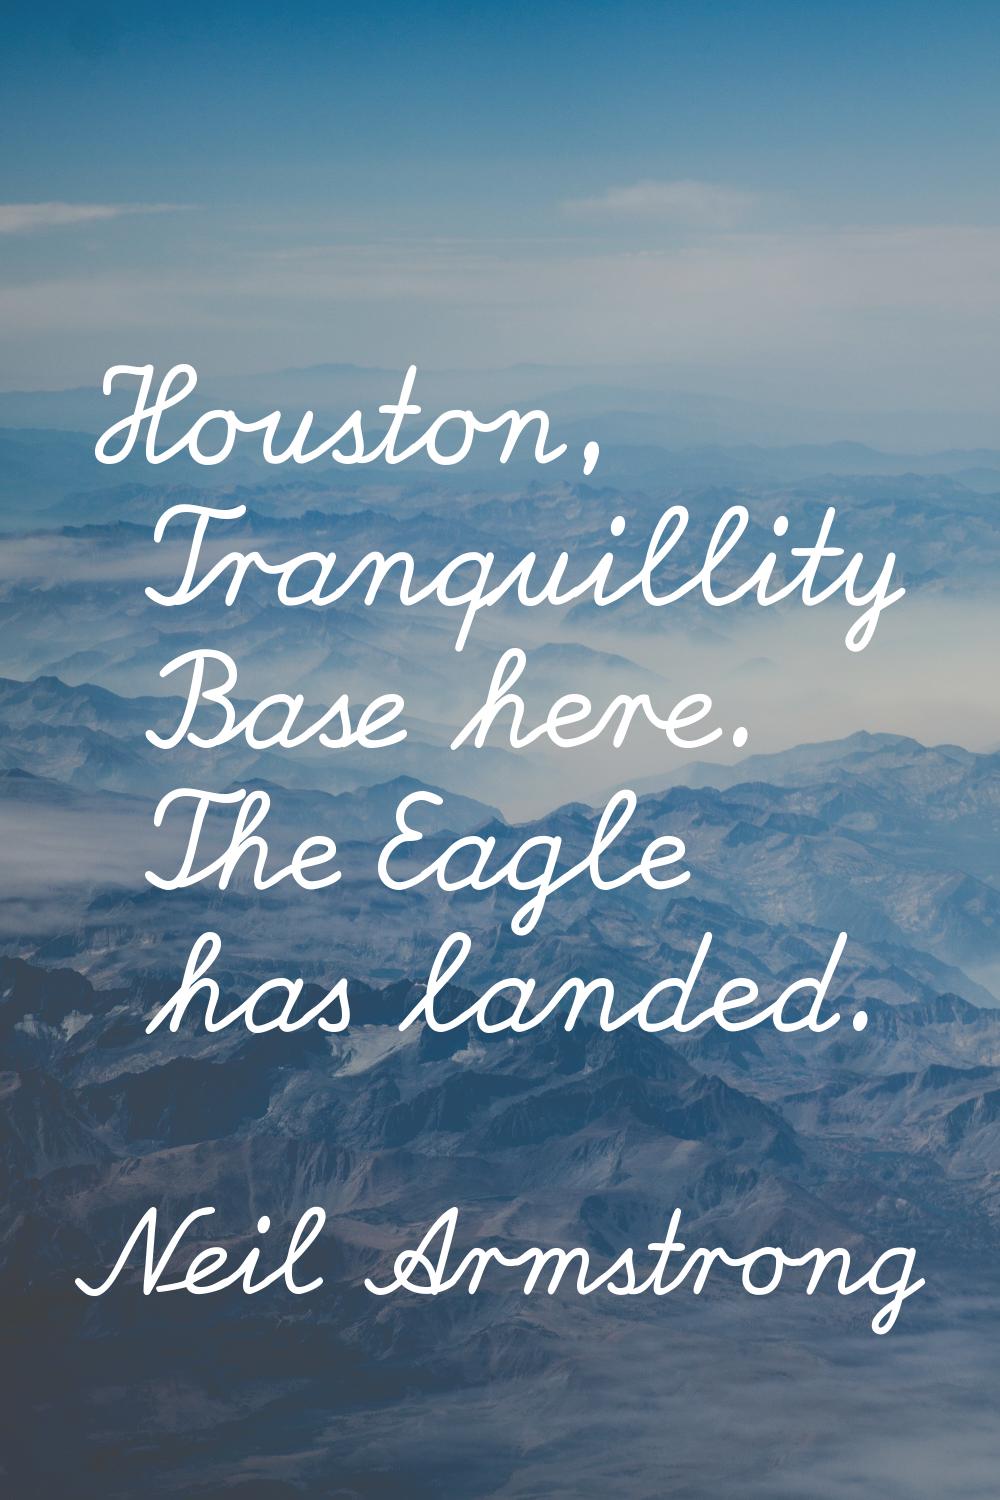 Houston, Tranquillity Base here. The Eagle has landed.